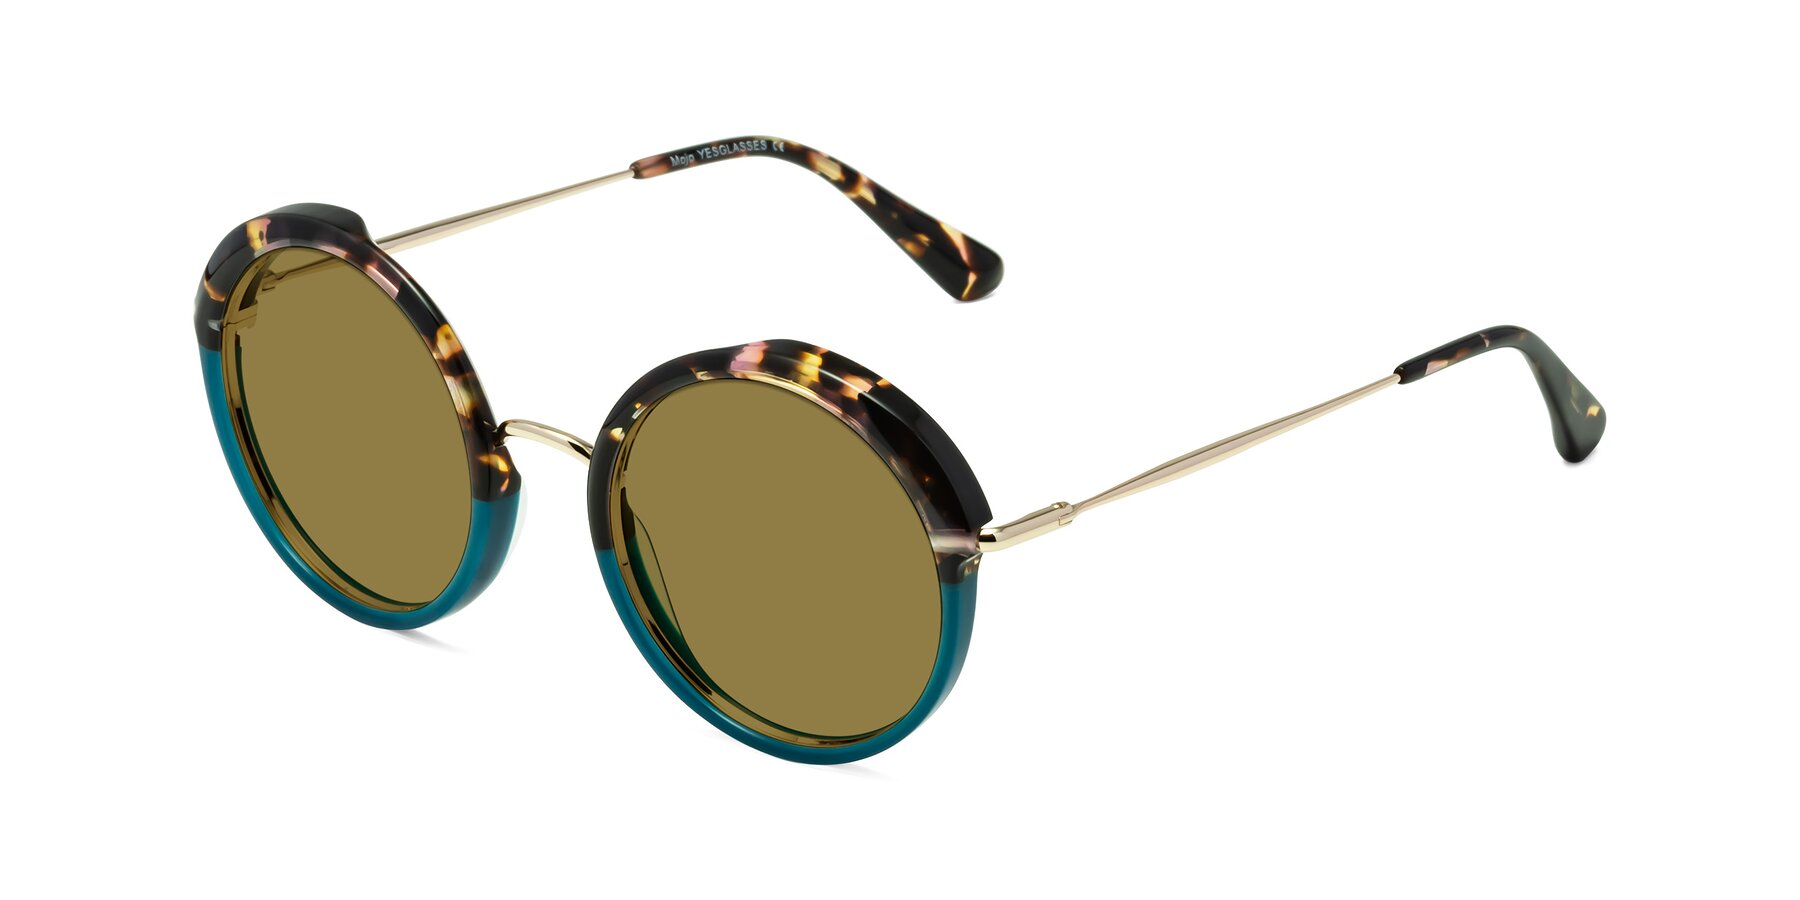 Angle of Mojo in Floral-Teal with Brown Polarized Lenses